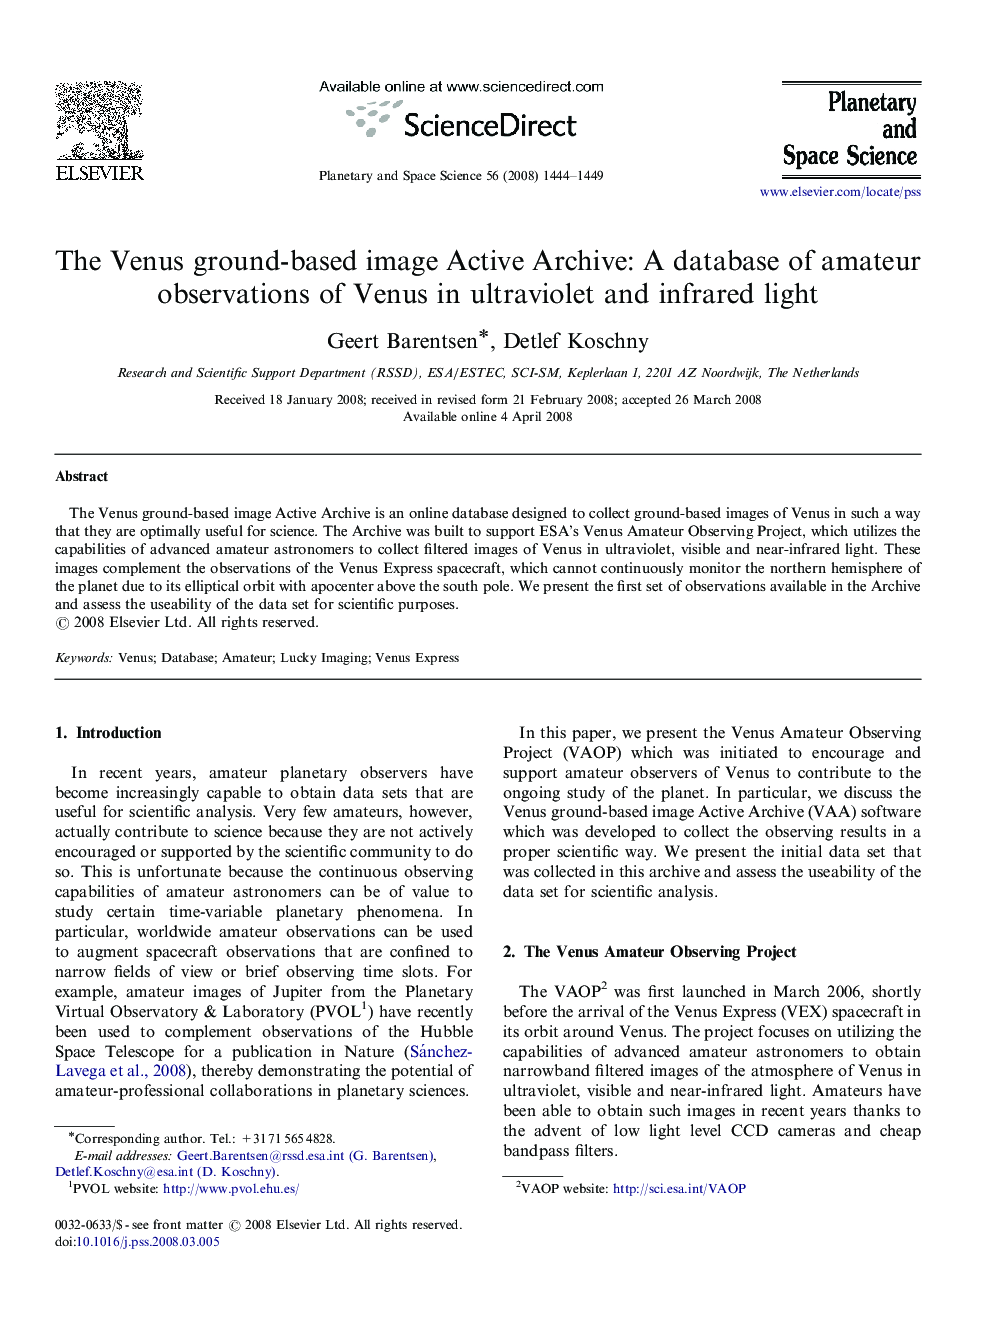 The Venus ground-based image Active Archive: A database of amateur observations of Venus in ultraviolet and infrared light